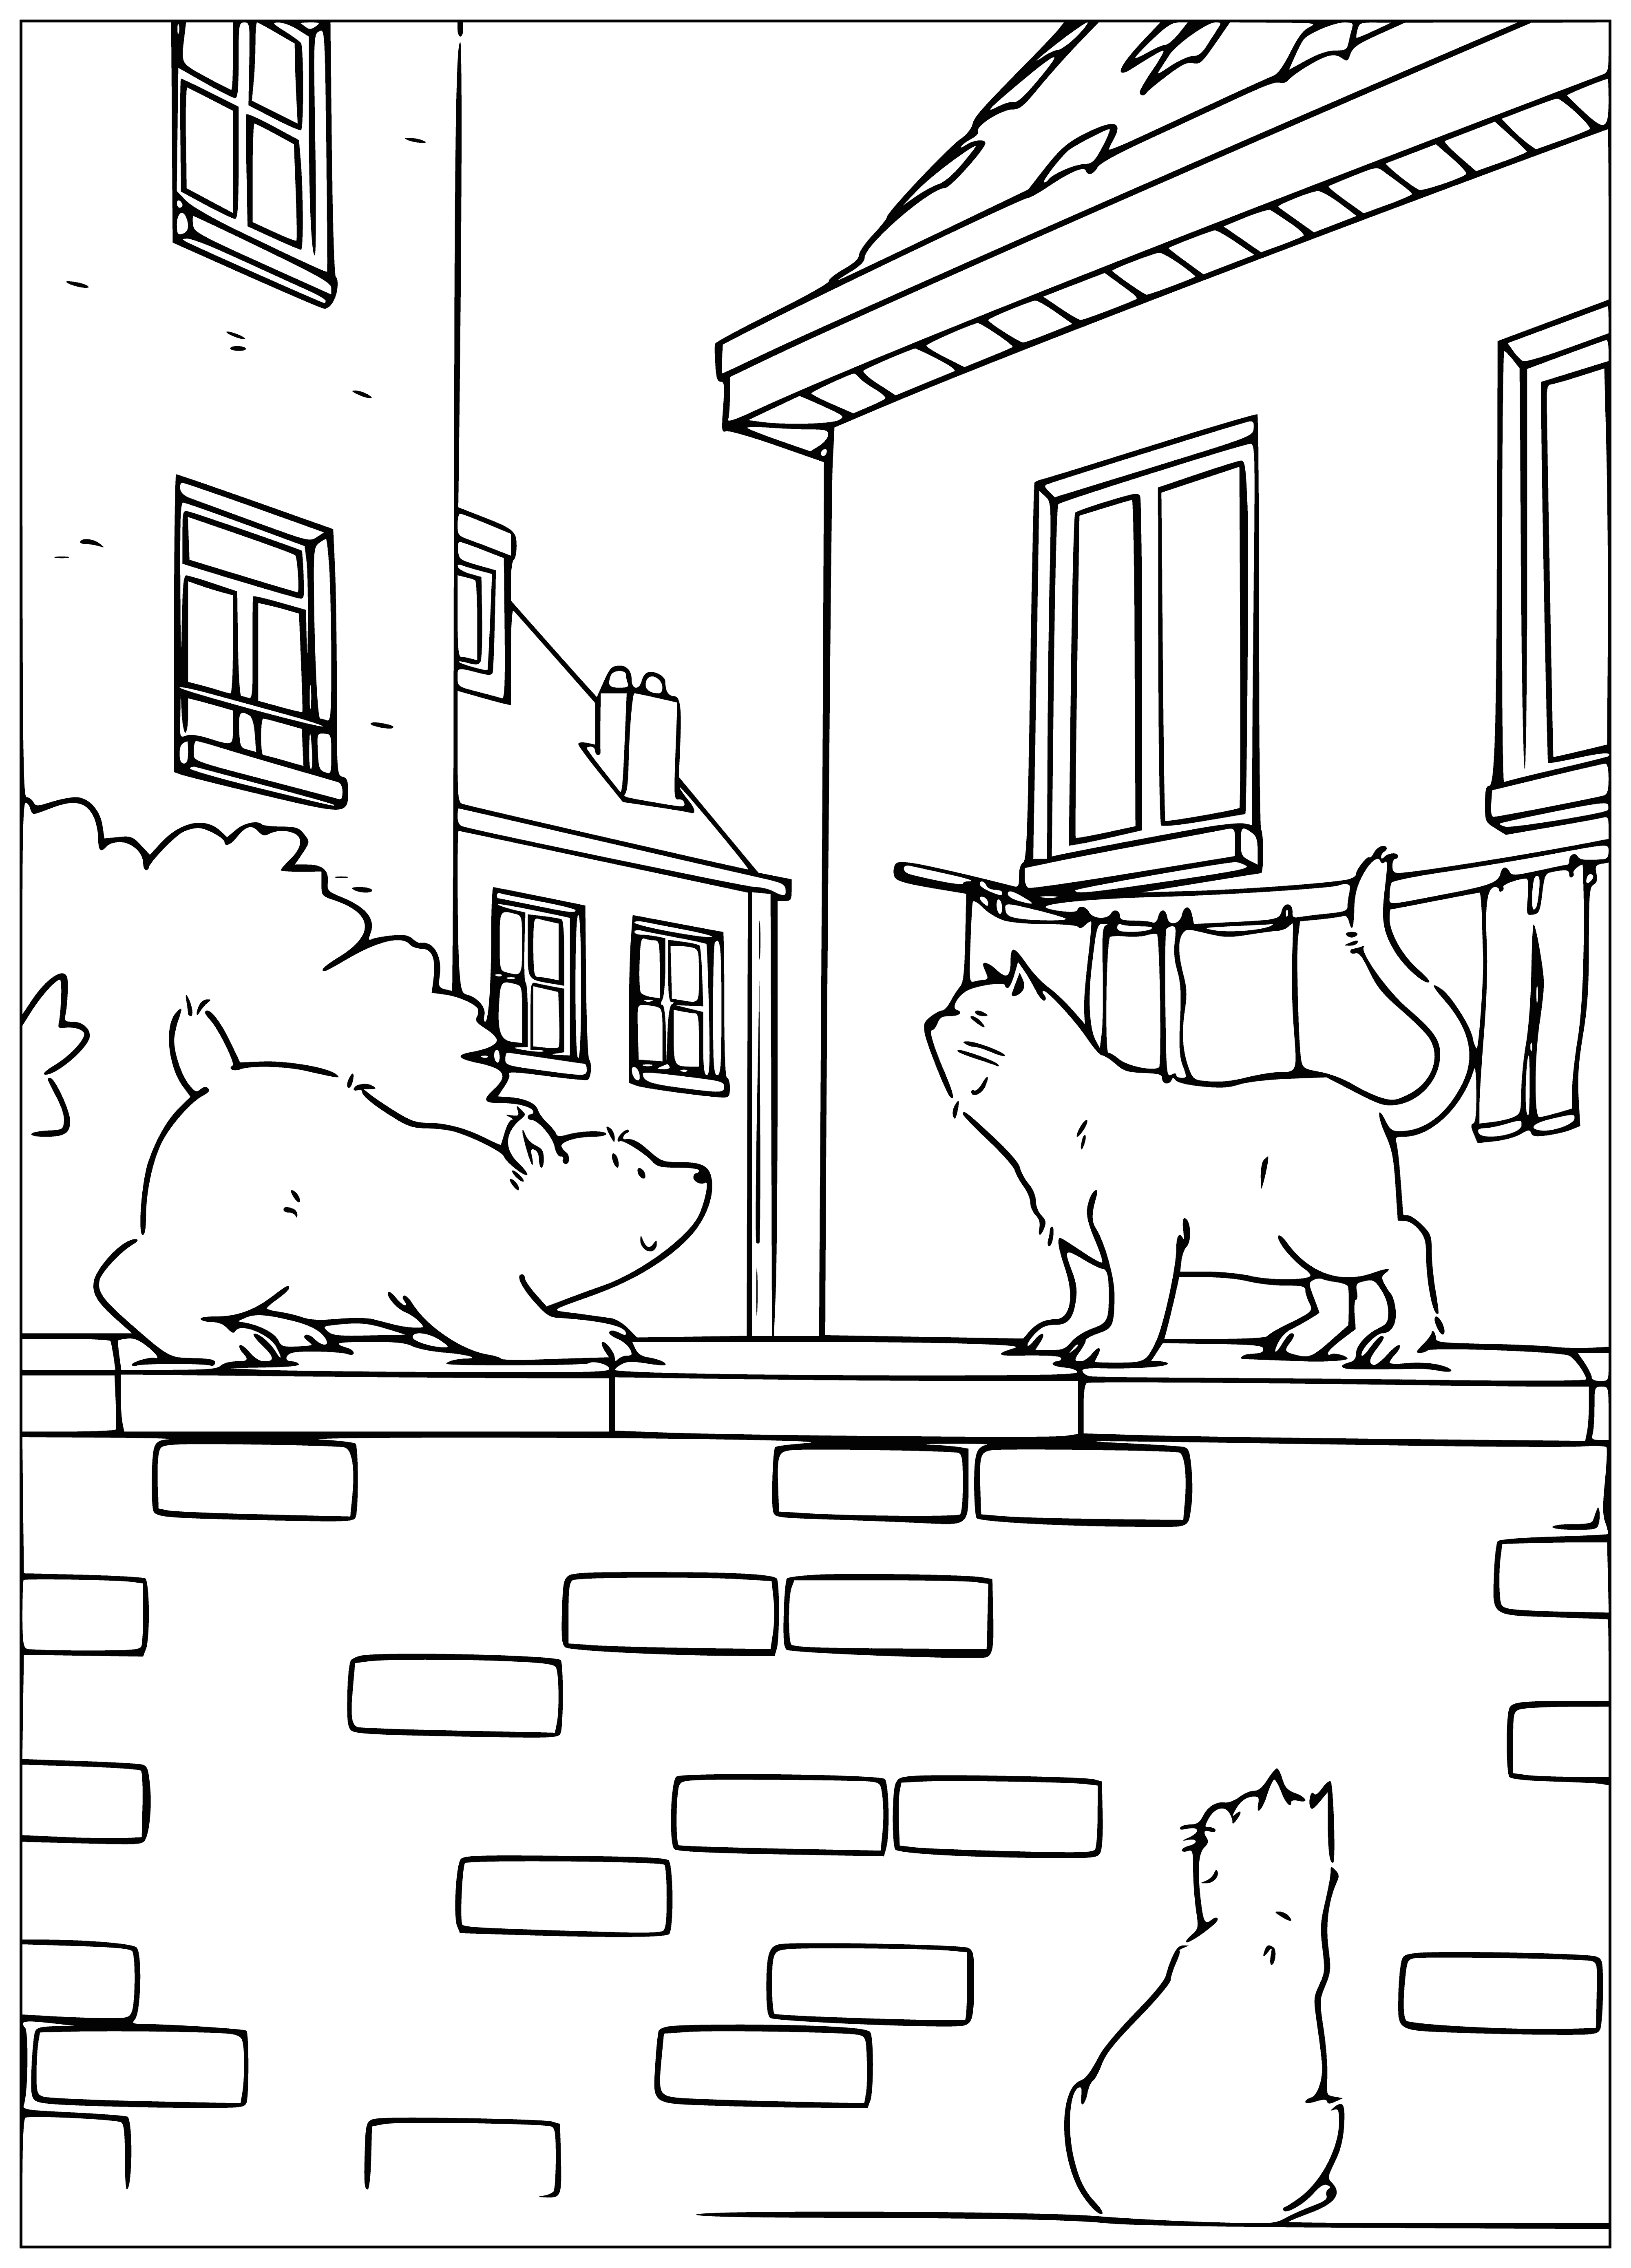 coloring page: Lars the polar bear is playing with his feline friend, tumbling and having fun on the icy ground. They both seem to be having a blast!